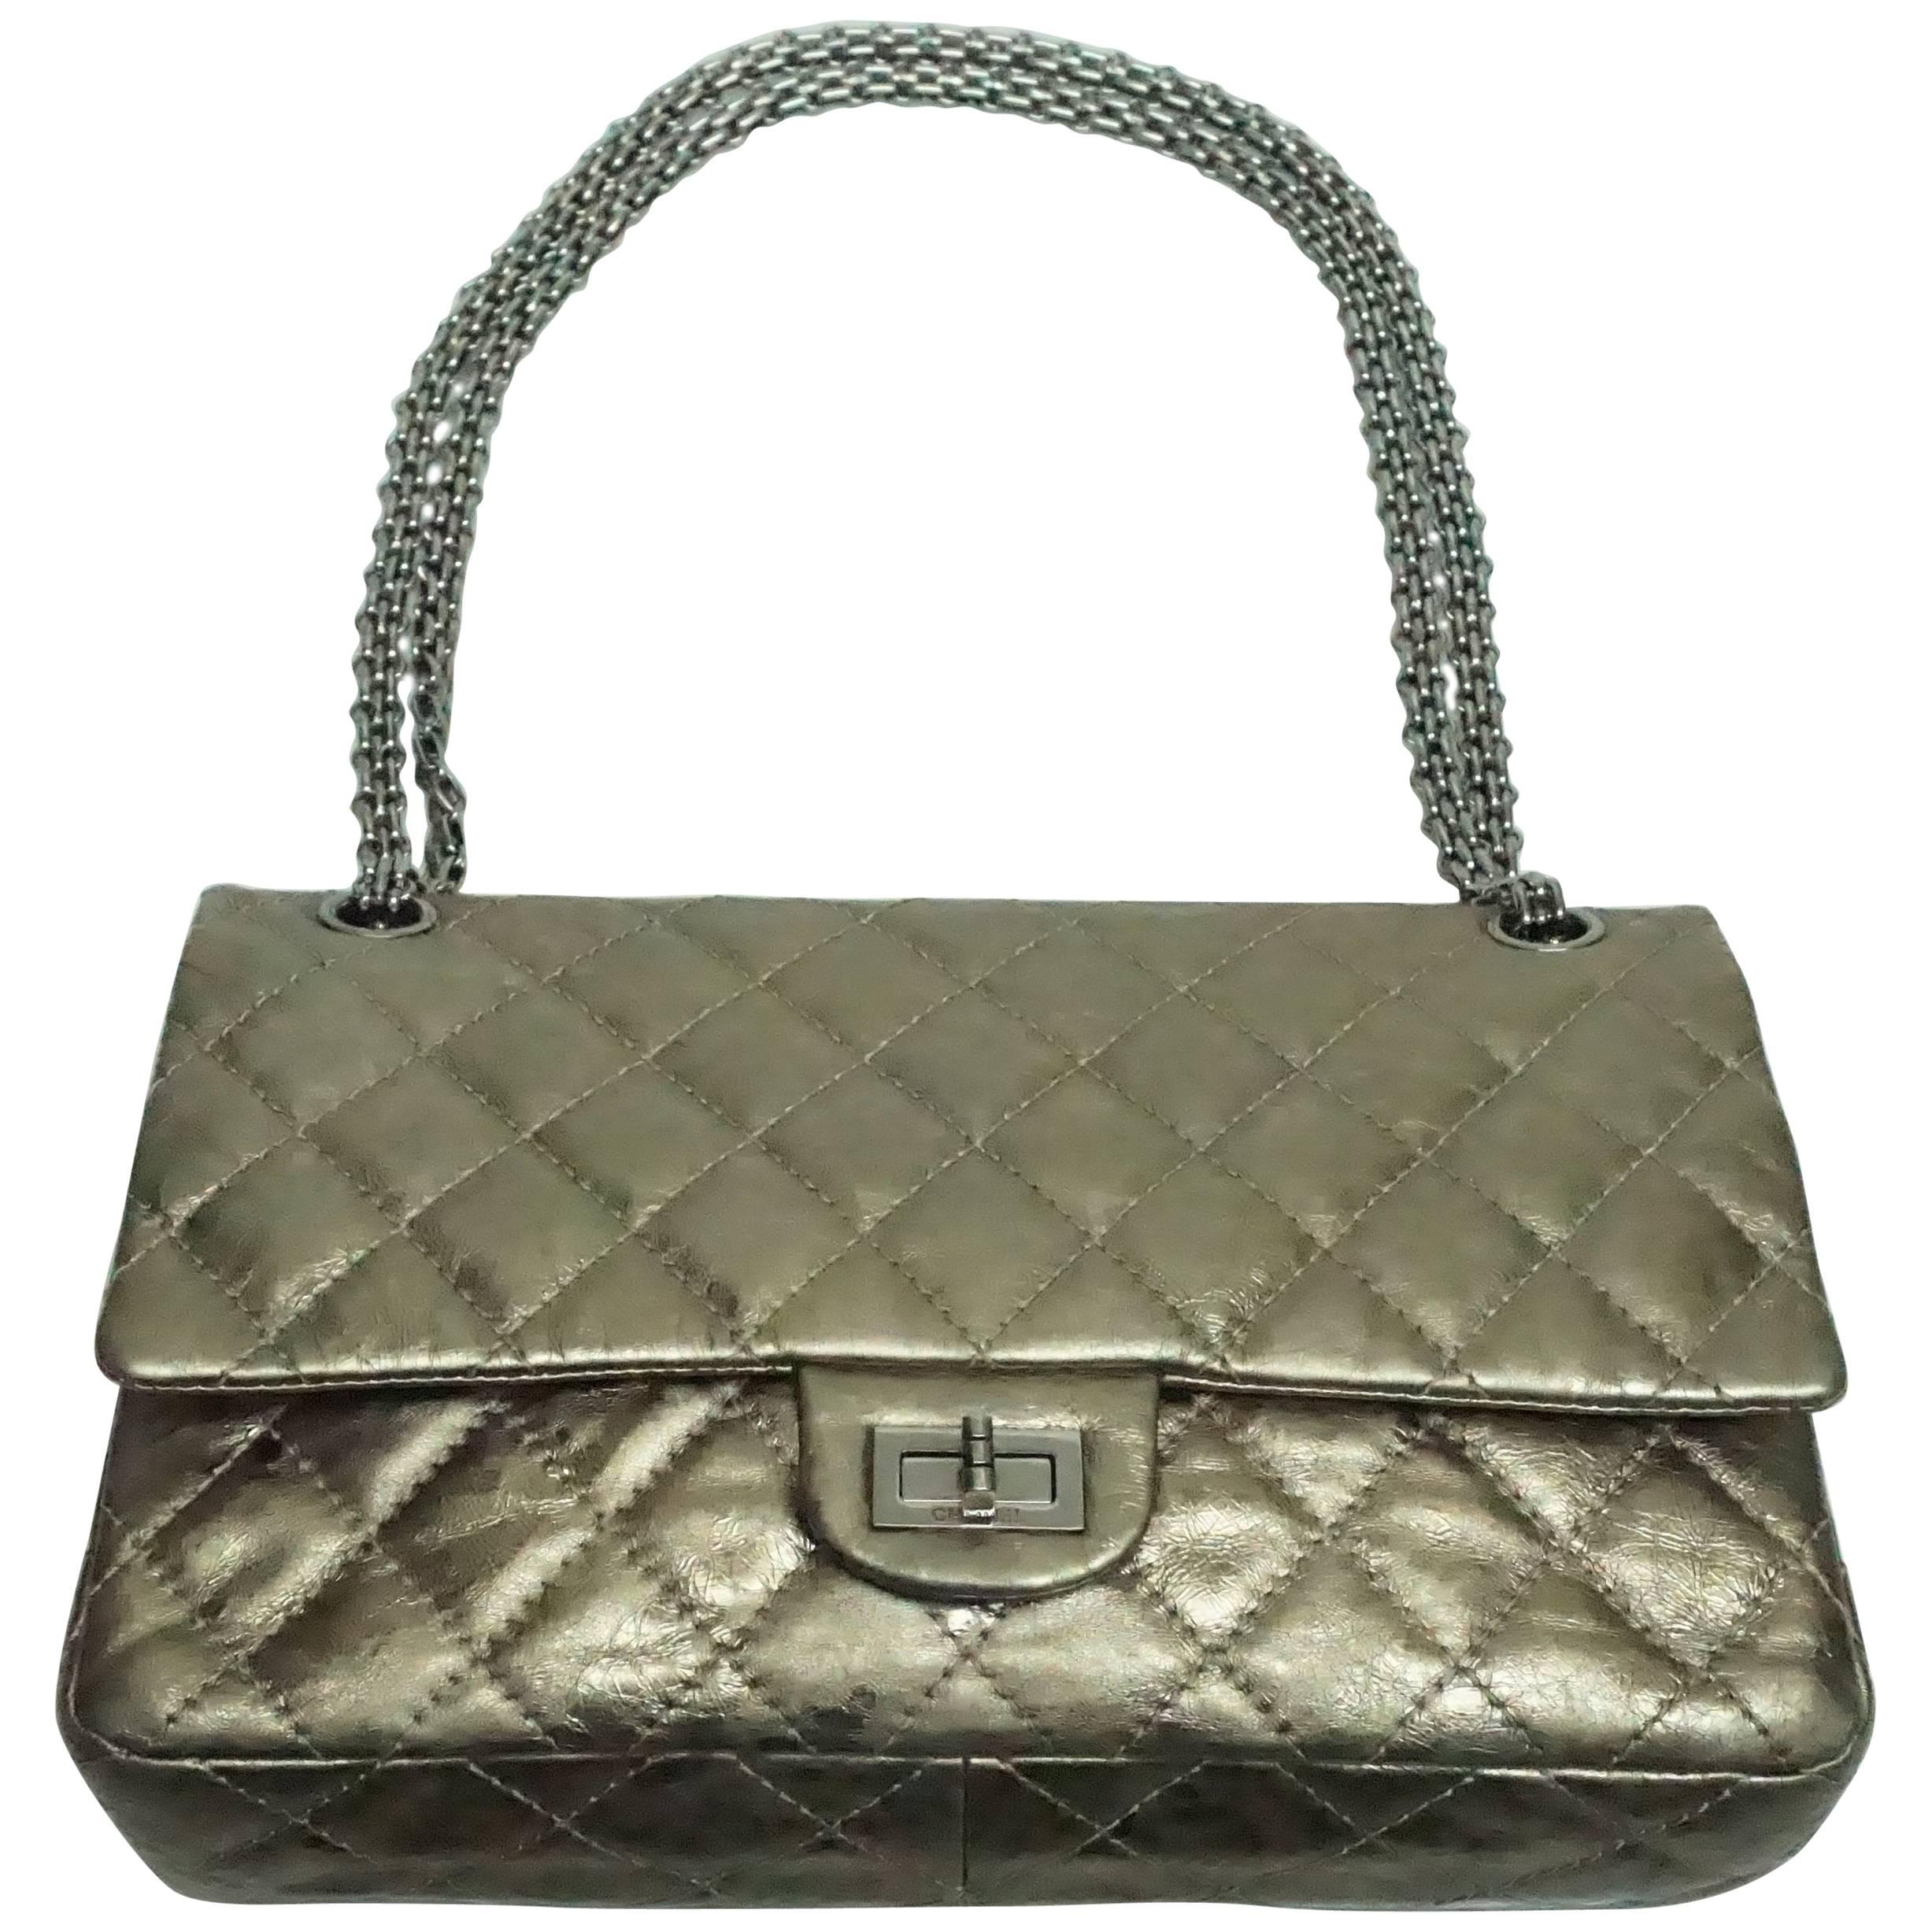 Chanel Bronze Metallic Lambskin 2.55 Double Flap - SHW - 226 size This beautiful reissue bag has the mademoiselle lock and chain in SHW. It is a spectacular metallic bronze lambskin. The bag is in very good condition. Circa 2006/2007.
 Measurements: